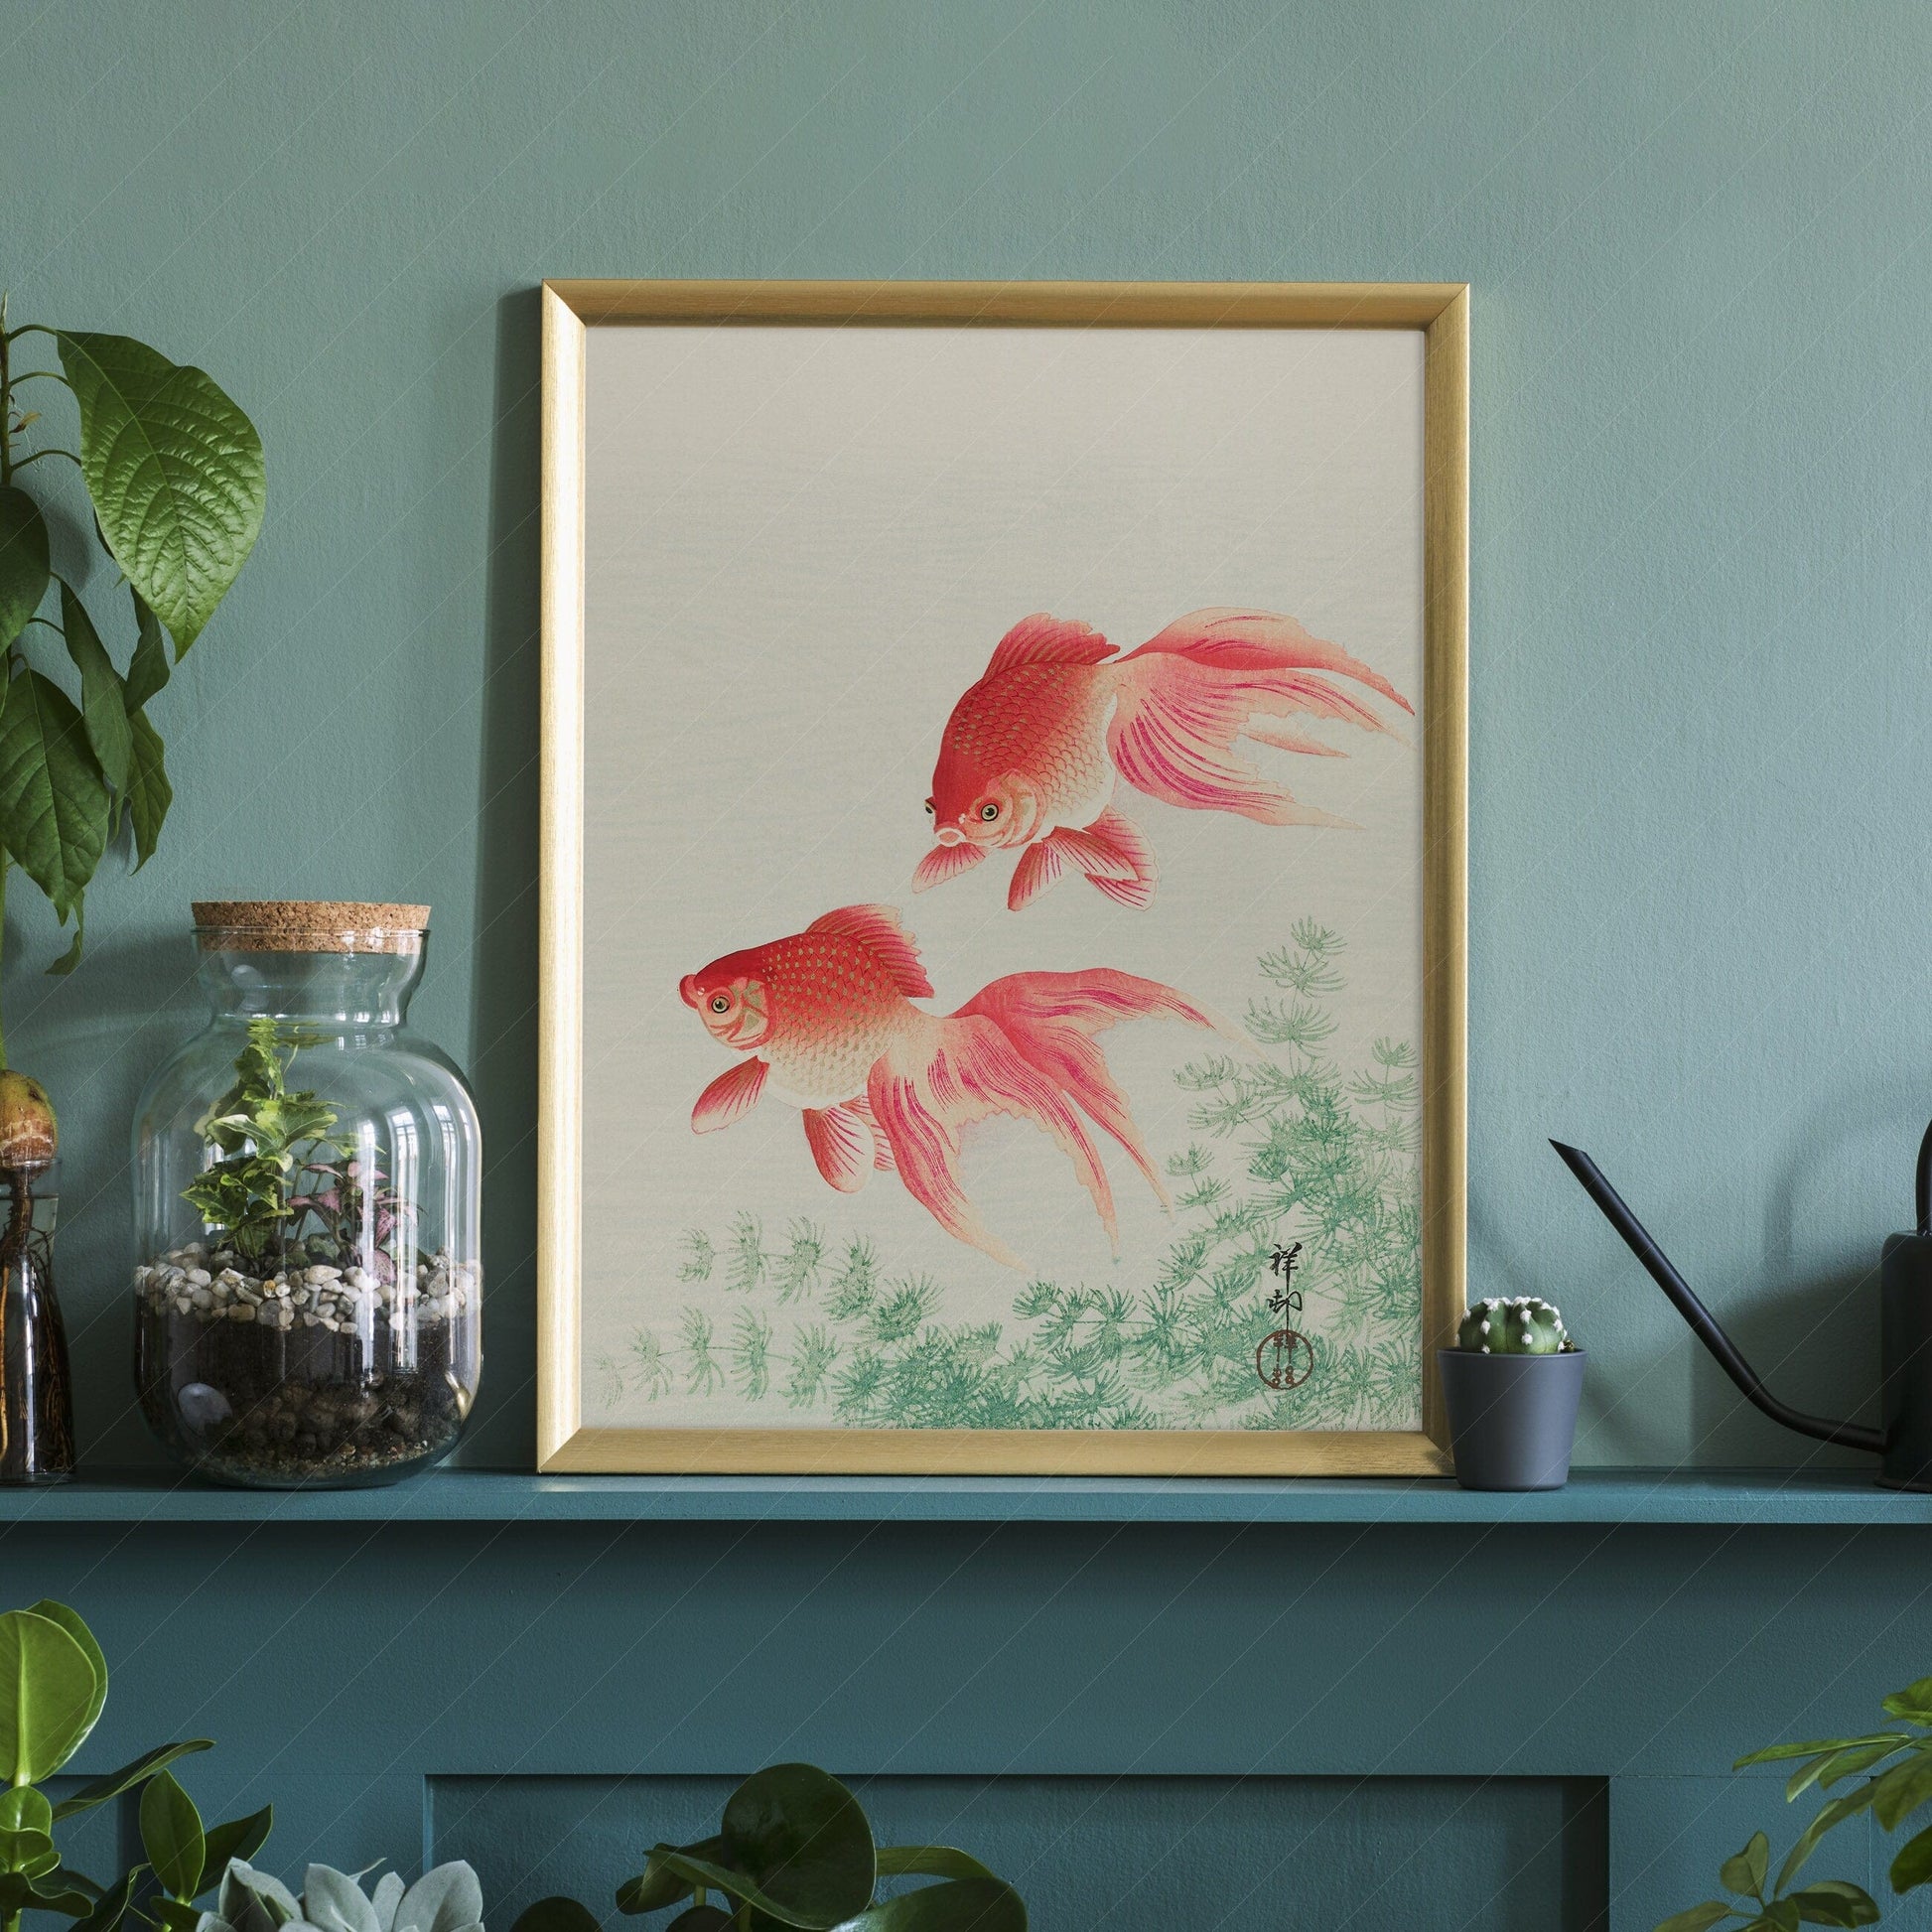 Home Poster Decor Japanese Wall Art, Vintage Poster, Retro Art, Japanese Fish, Goldfish Art, Watercolor Fish, Japan Painting, High Quality Archival Paper